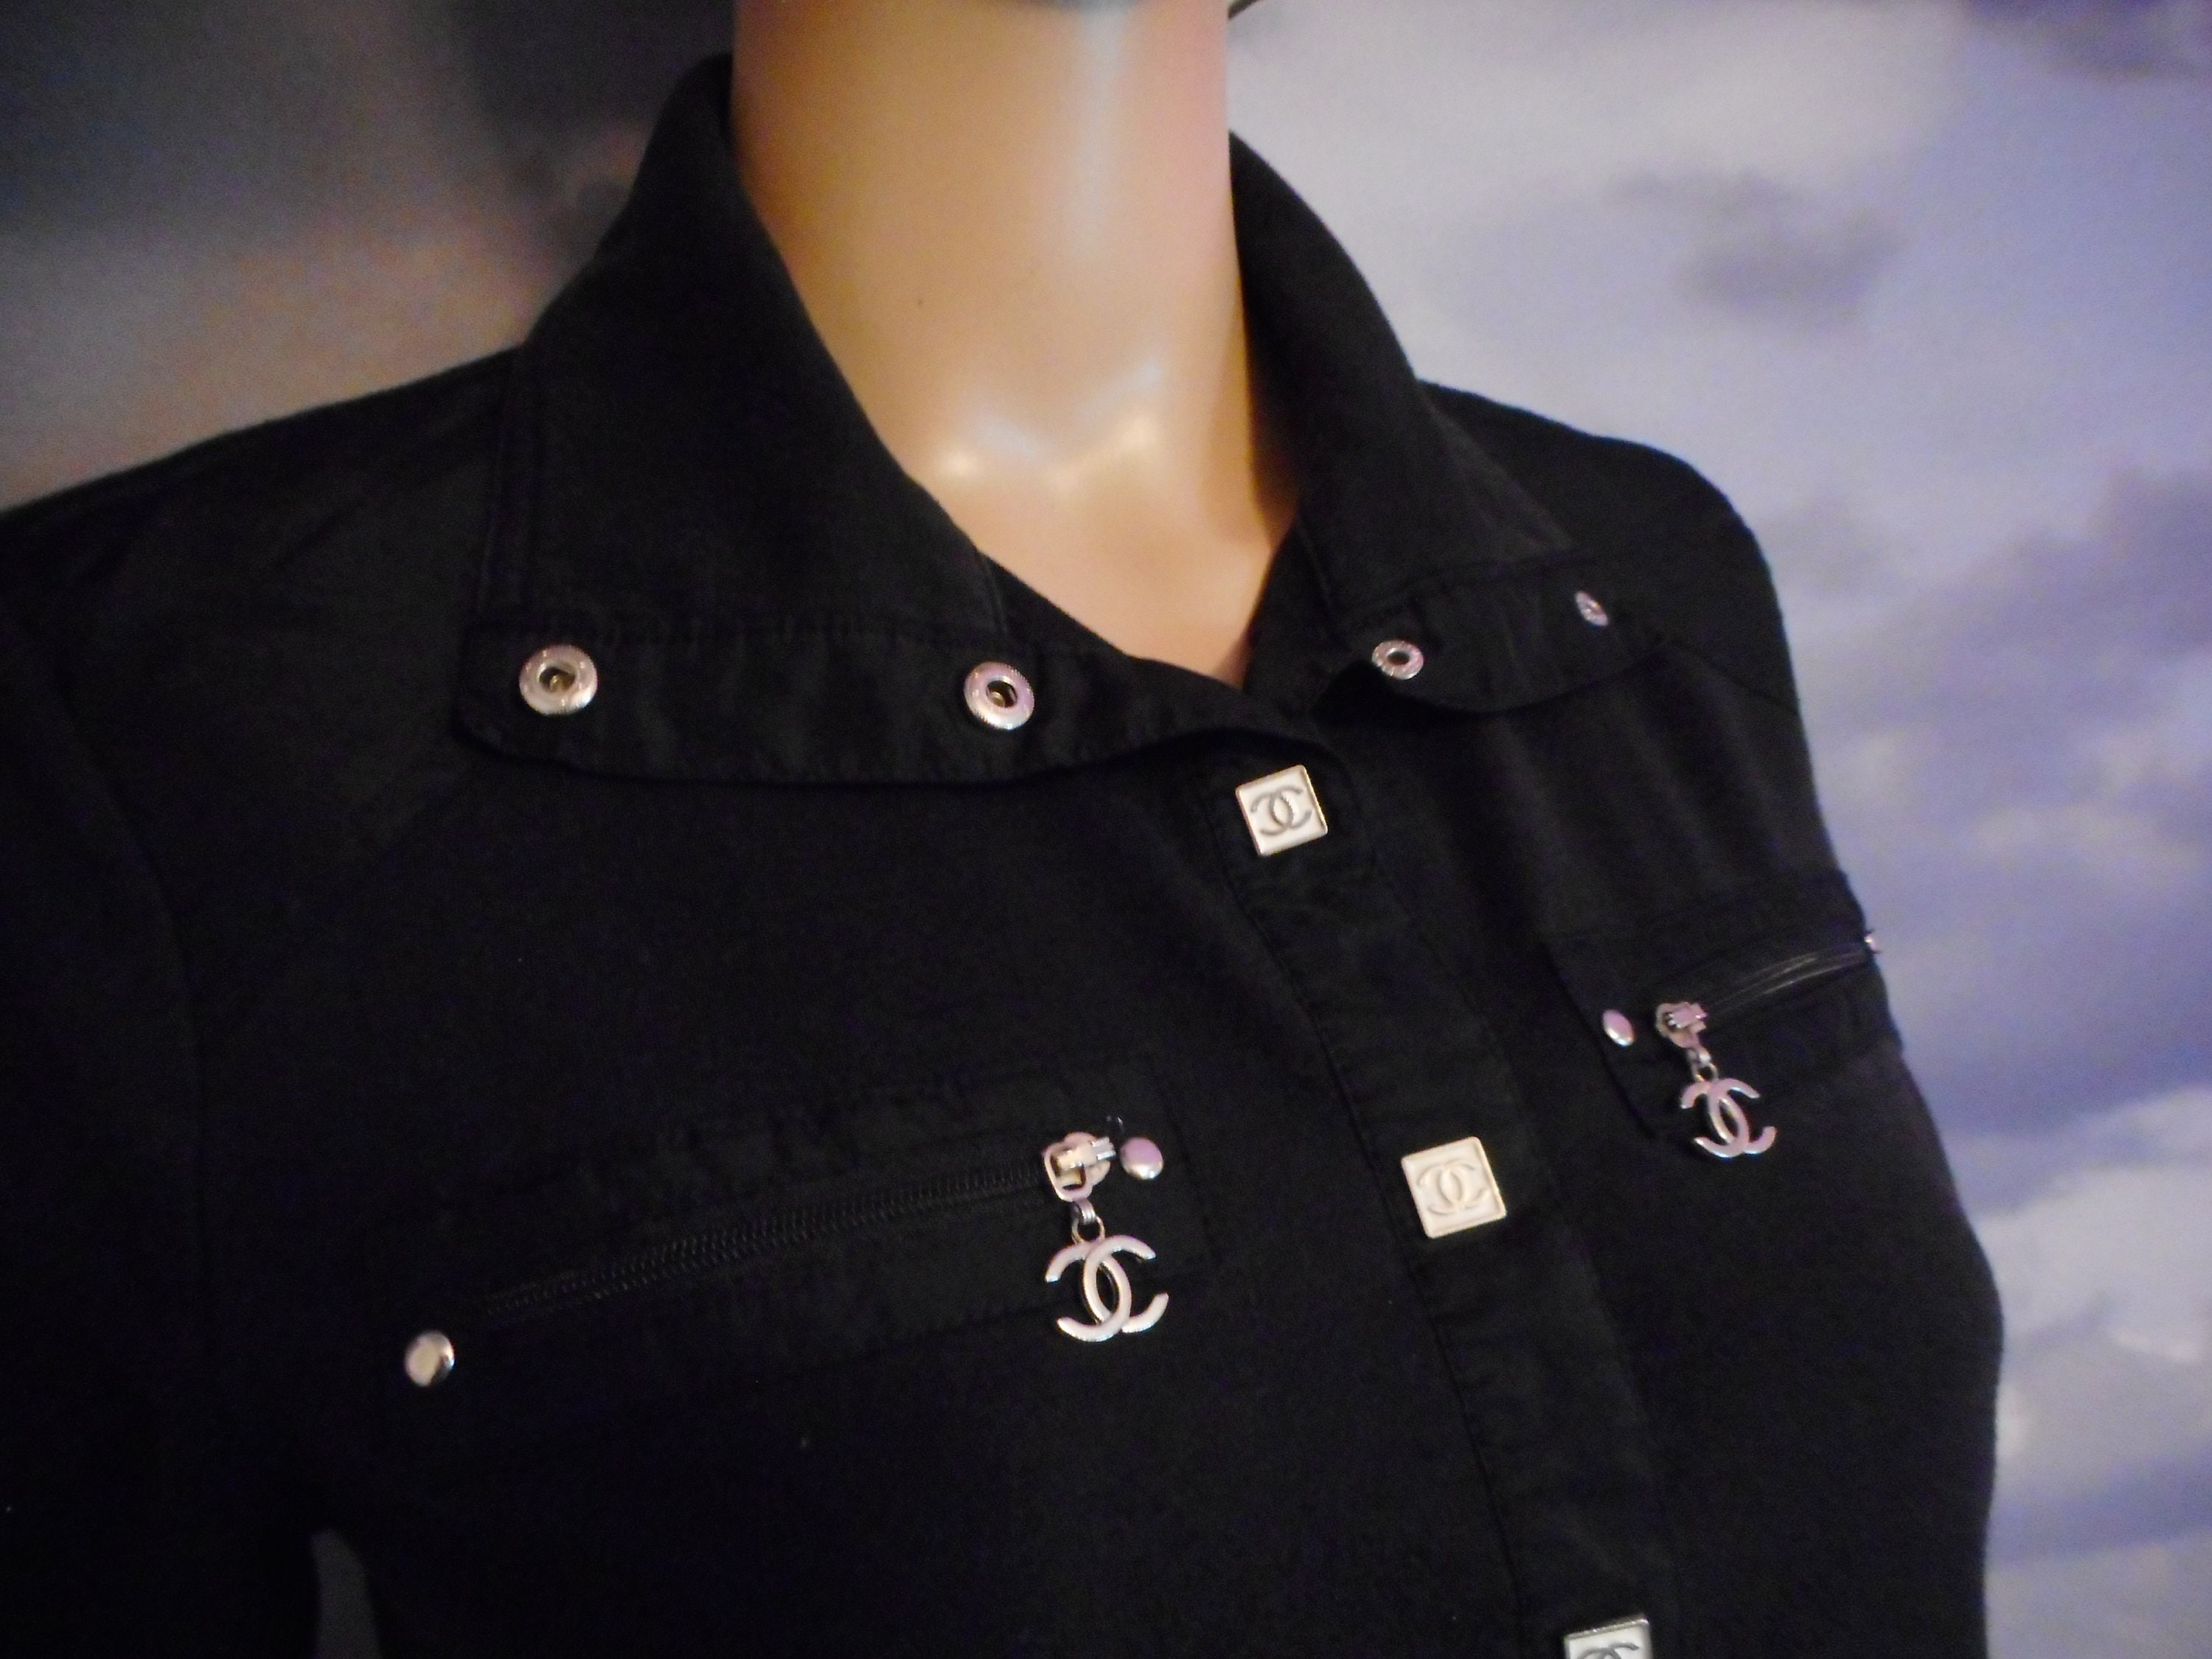 CHANEL 97P 1997 VINTAGE ICONIC MOST WANTED CC LOGO BLOUSE TOP 38 SM BLACK